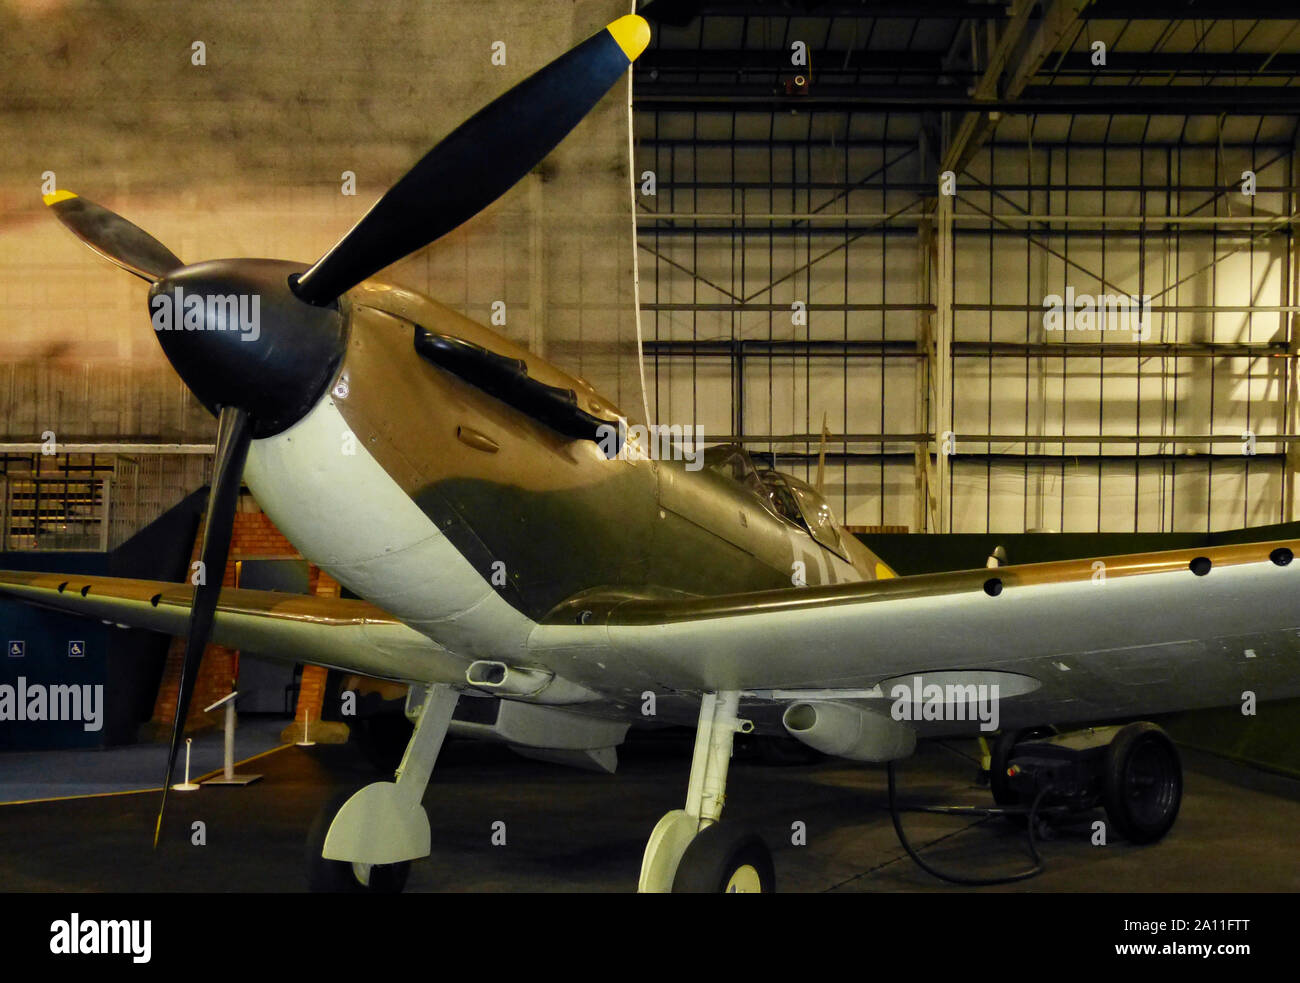 Royal Air Force (RAF) Museum / Hendon, London, UK - June 29, 2014: Real historic aircraft from all over the world on display: Supermarine Spitfire Mk1 Stock Photo